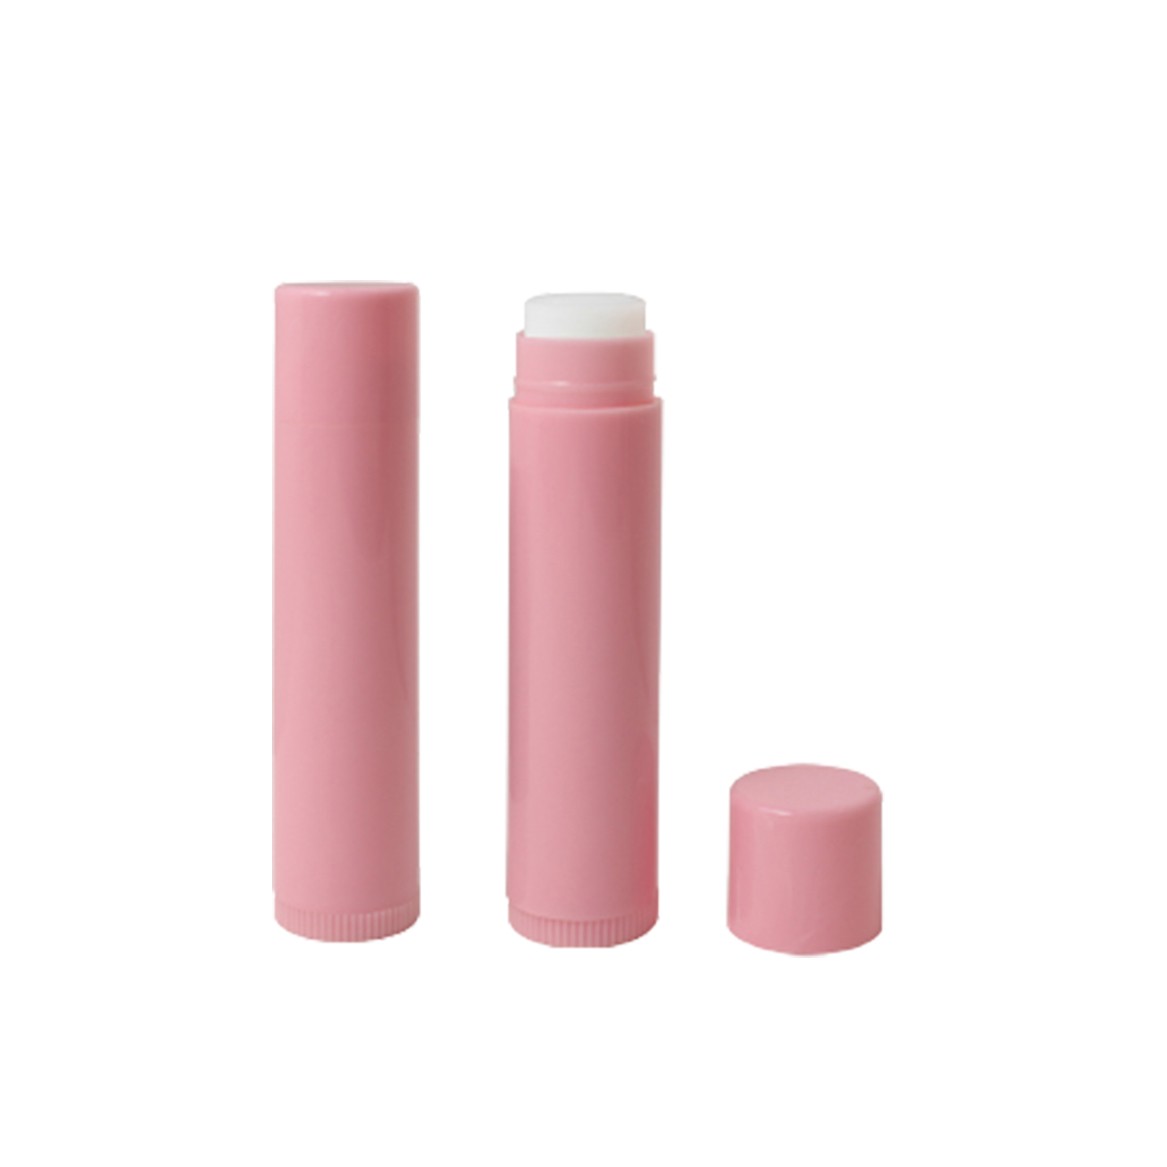 Best Selling Lip moisture balm case packaging lip care with customize color and design handy twist up